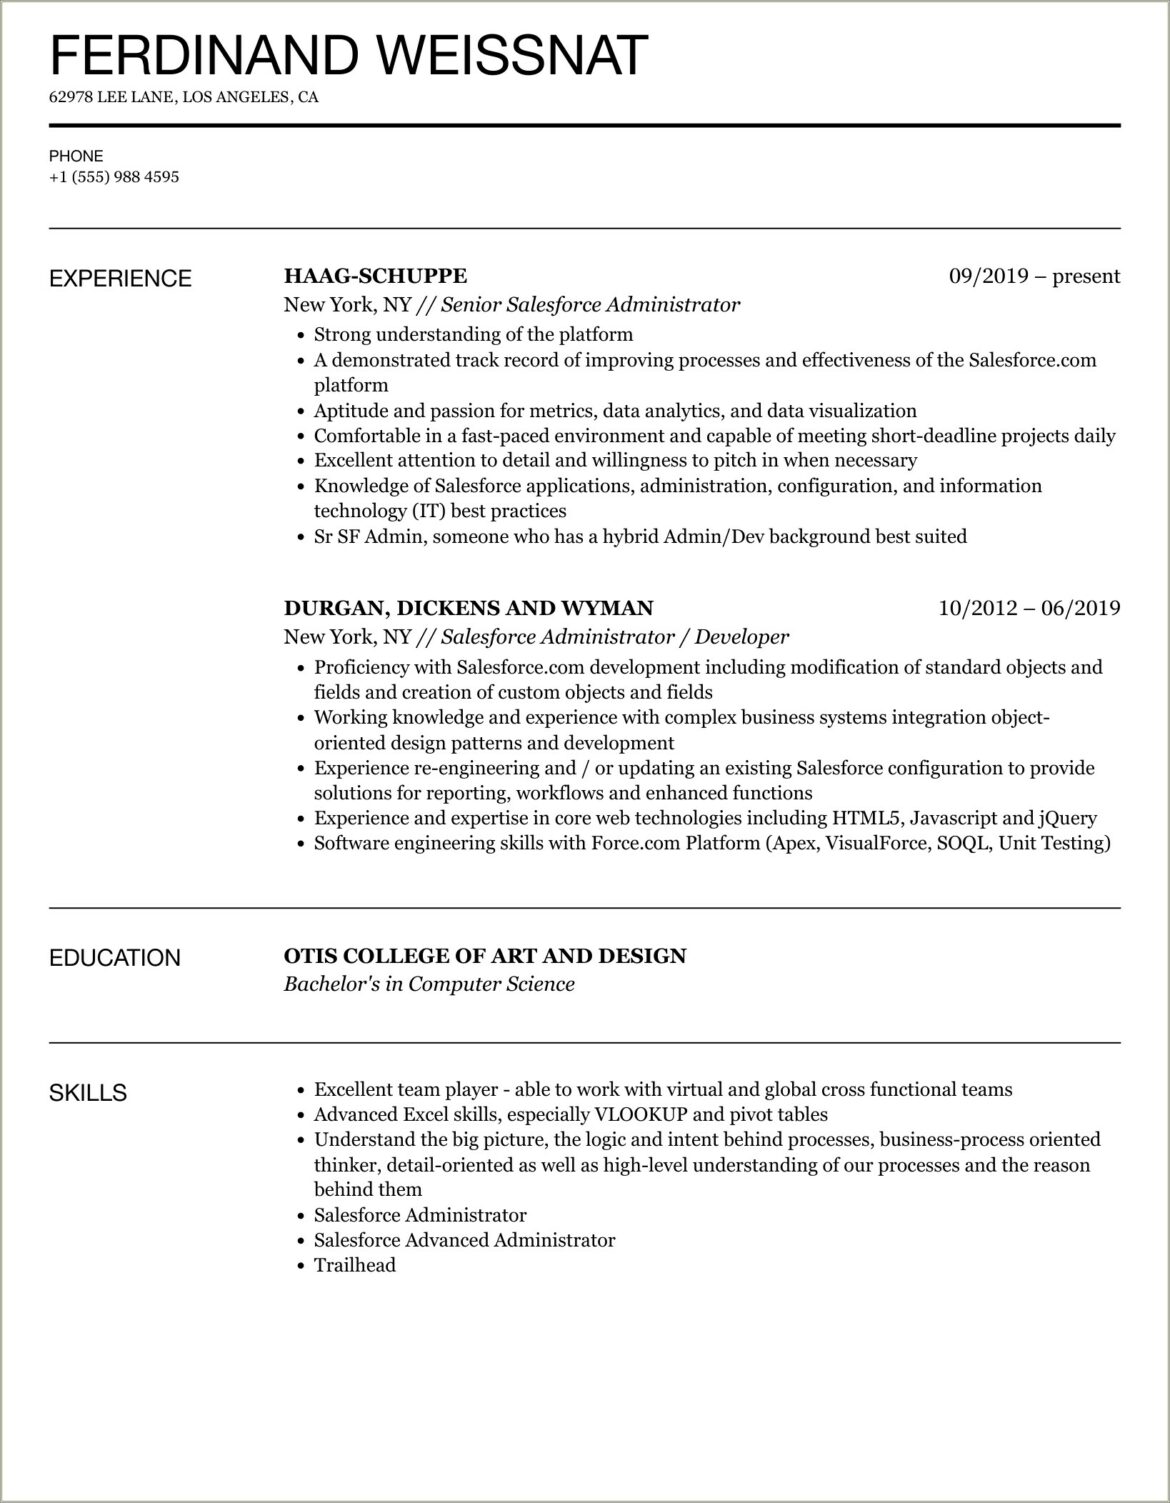 Sample Resume To Say I Have Use Salesforce